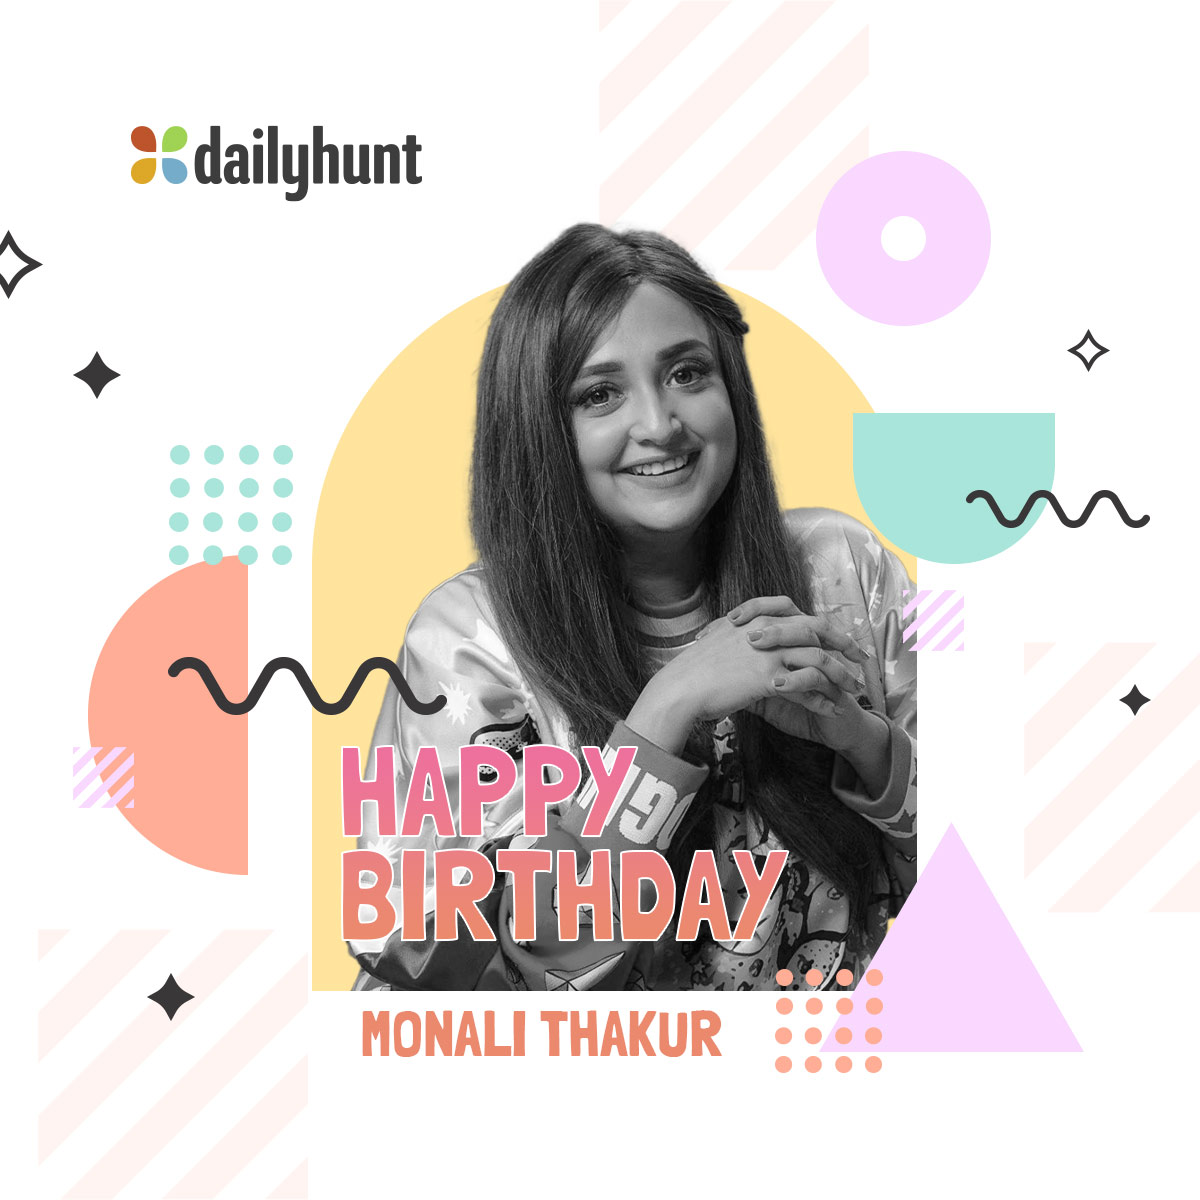 The world is a little bit brighter only because of you. Happy Birthday!
ജന്മദിനാശംസകൾ...🎉🎁🎂✨🎈
@monalithakur03
#HappyBirthday #MonaliThakur #HBDMonaliThakur #MonaliThakurBirthday #Dailyhunt #Birthday #HappyBirthdayMonaliThakur